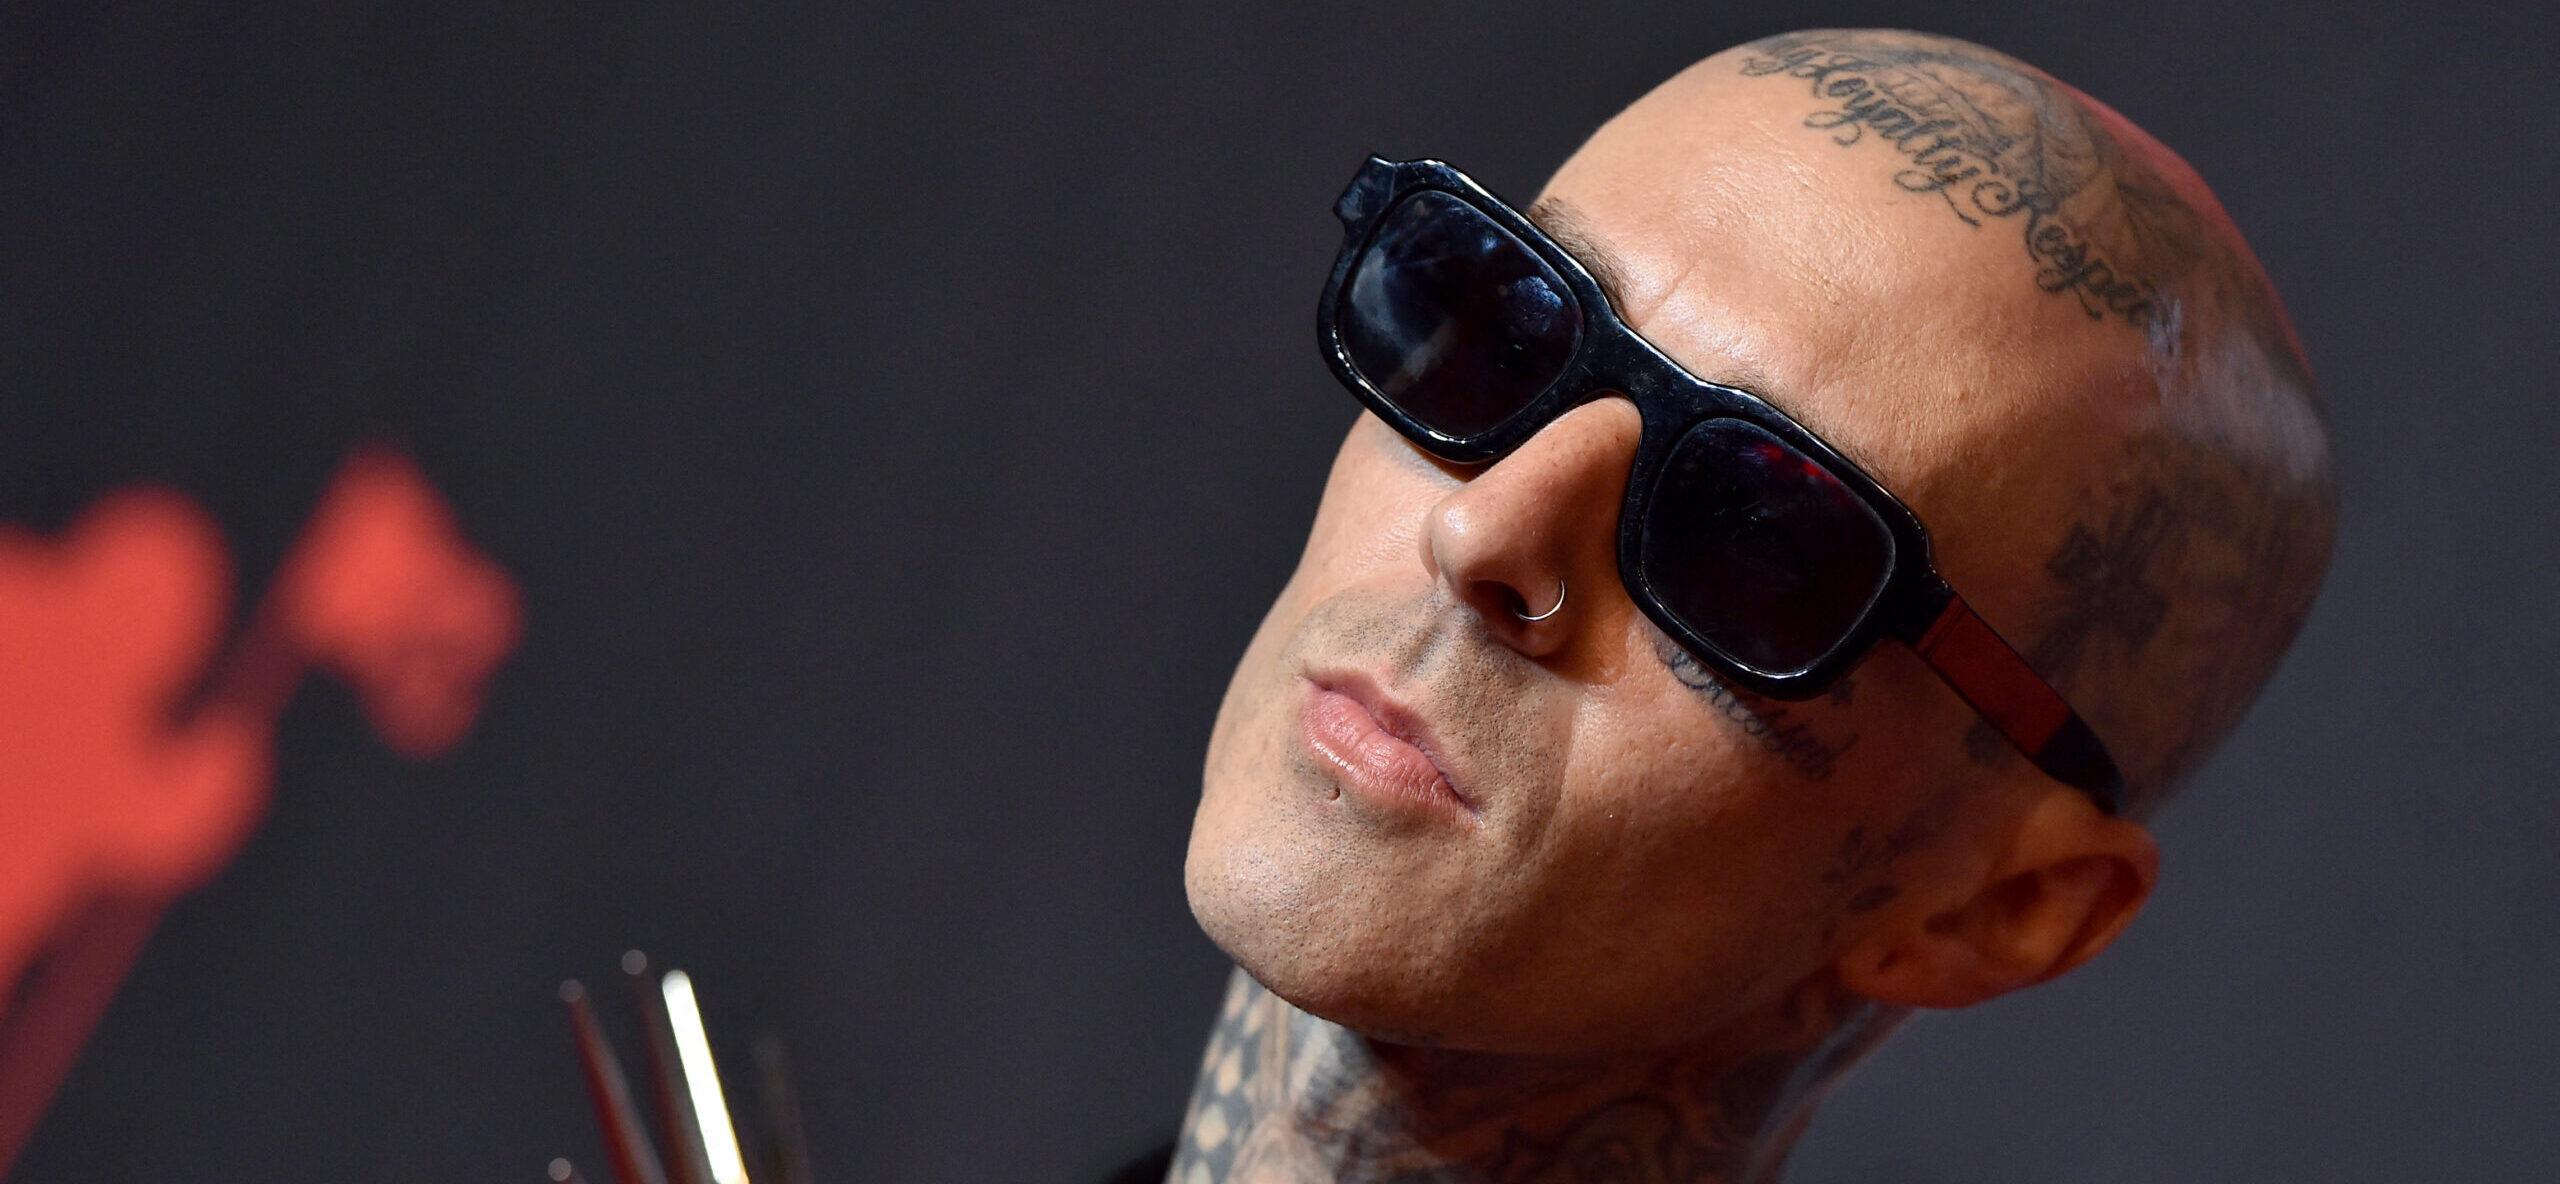 Travis Barker's Mysterious 'Sensitive Content' On IG Leaves Fans Worried